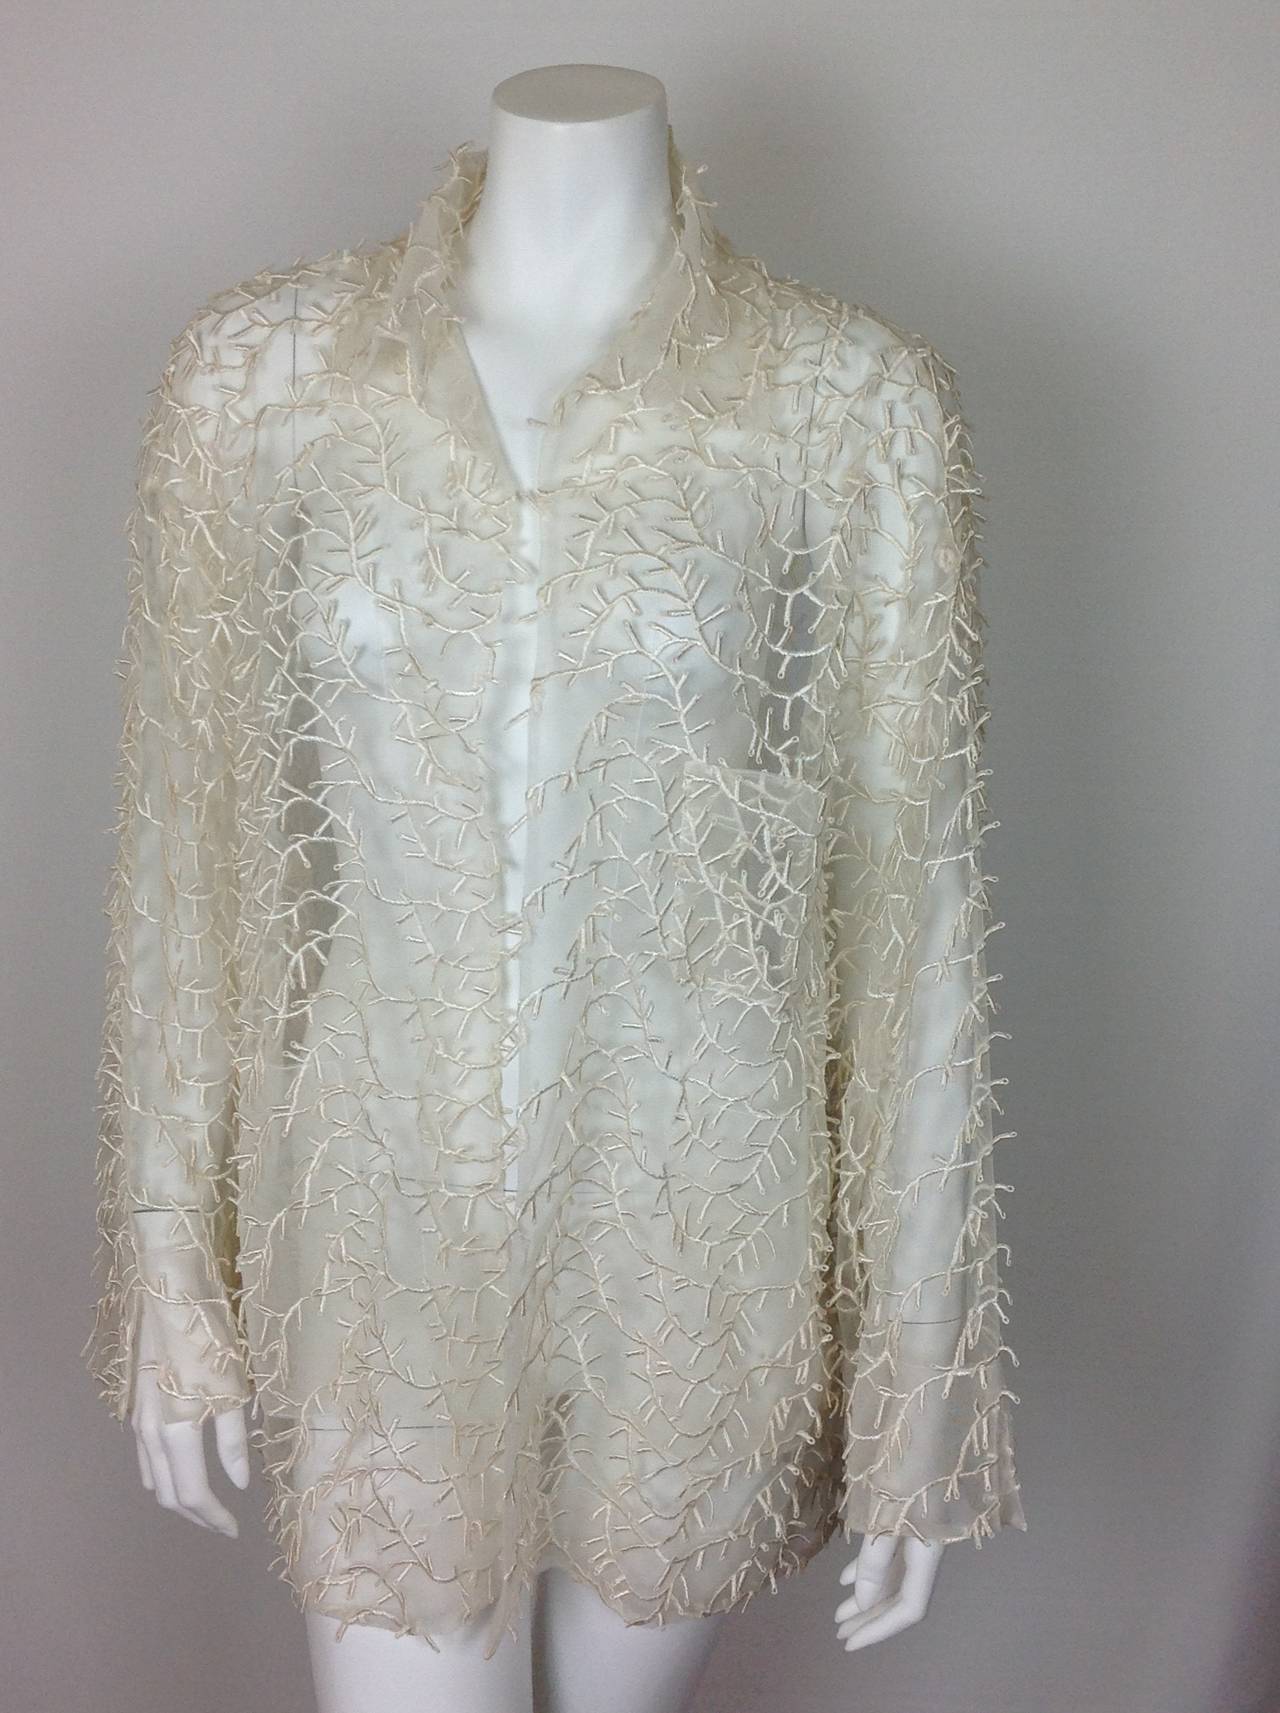 Mesh cream vine/eyelash jacket Miss V by Valentino.
Lightweight mesh embroidered with vines.The embroidered stylized 